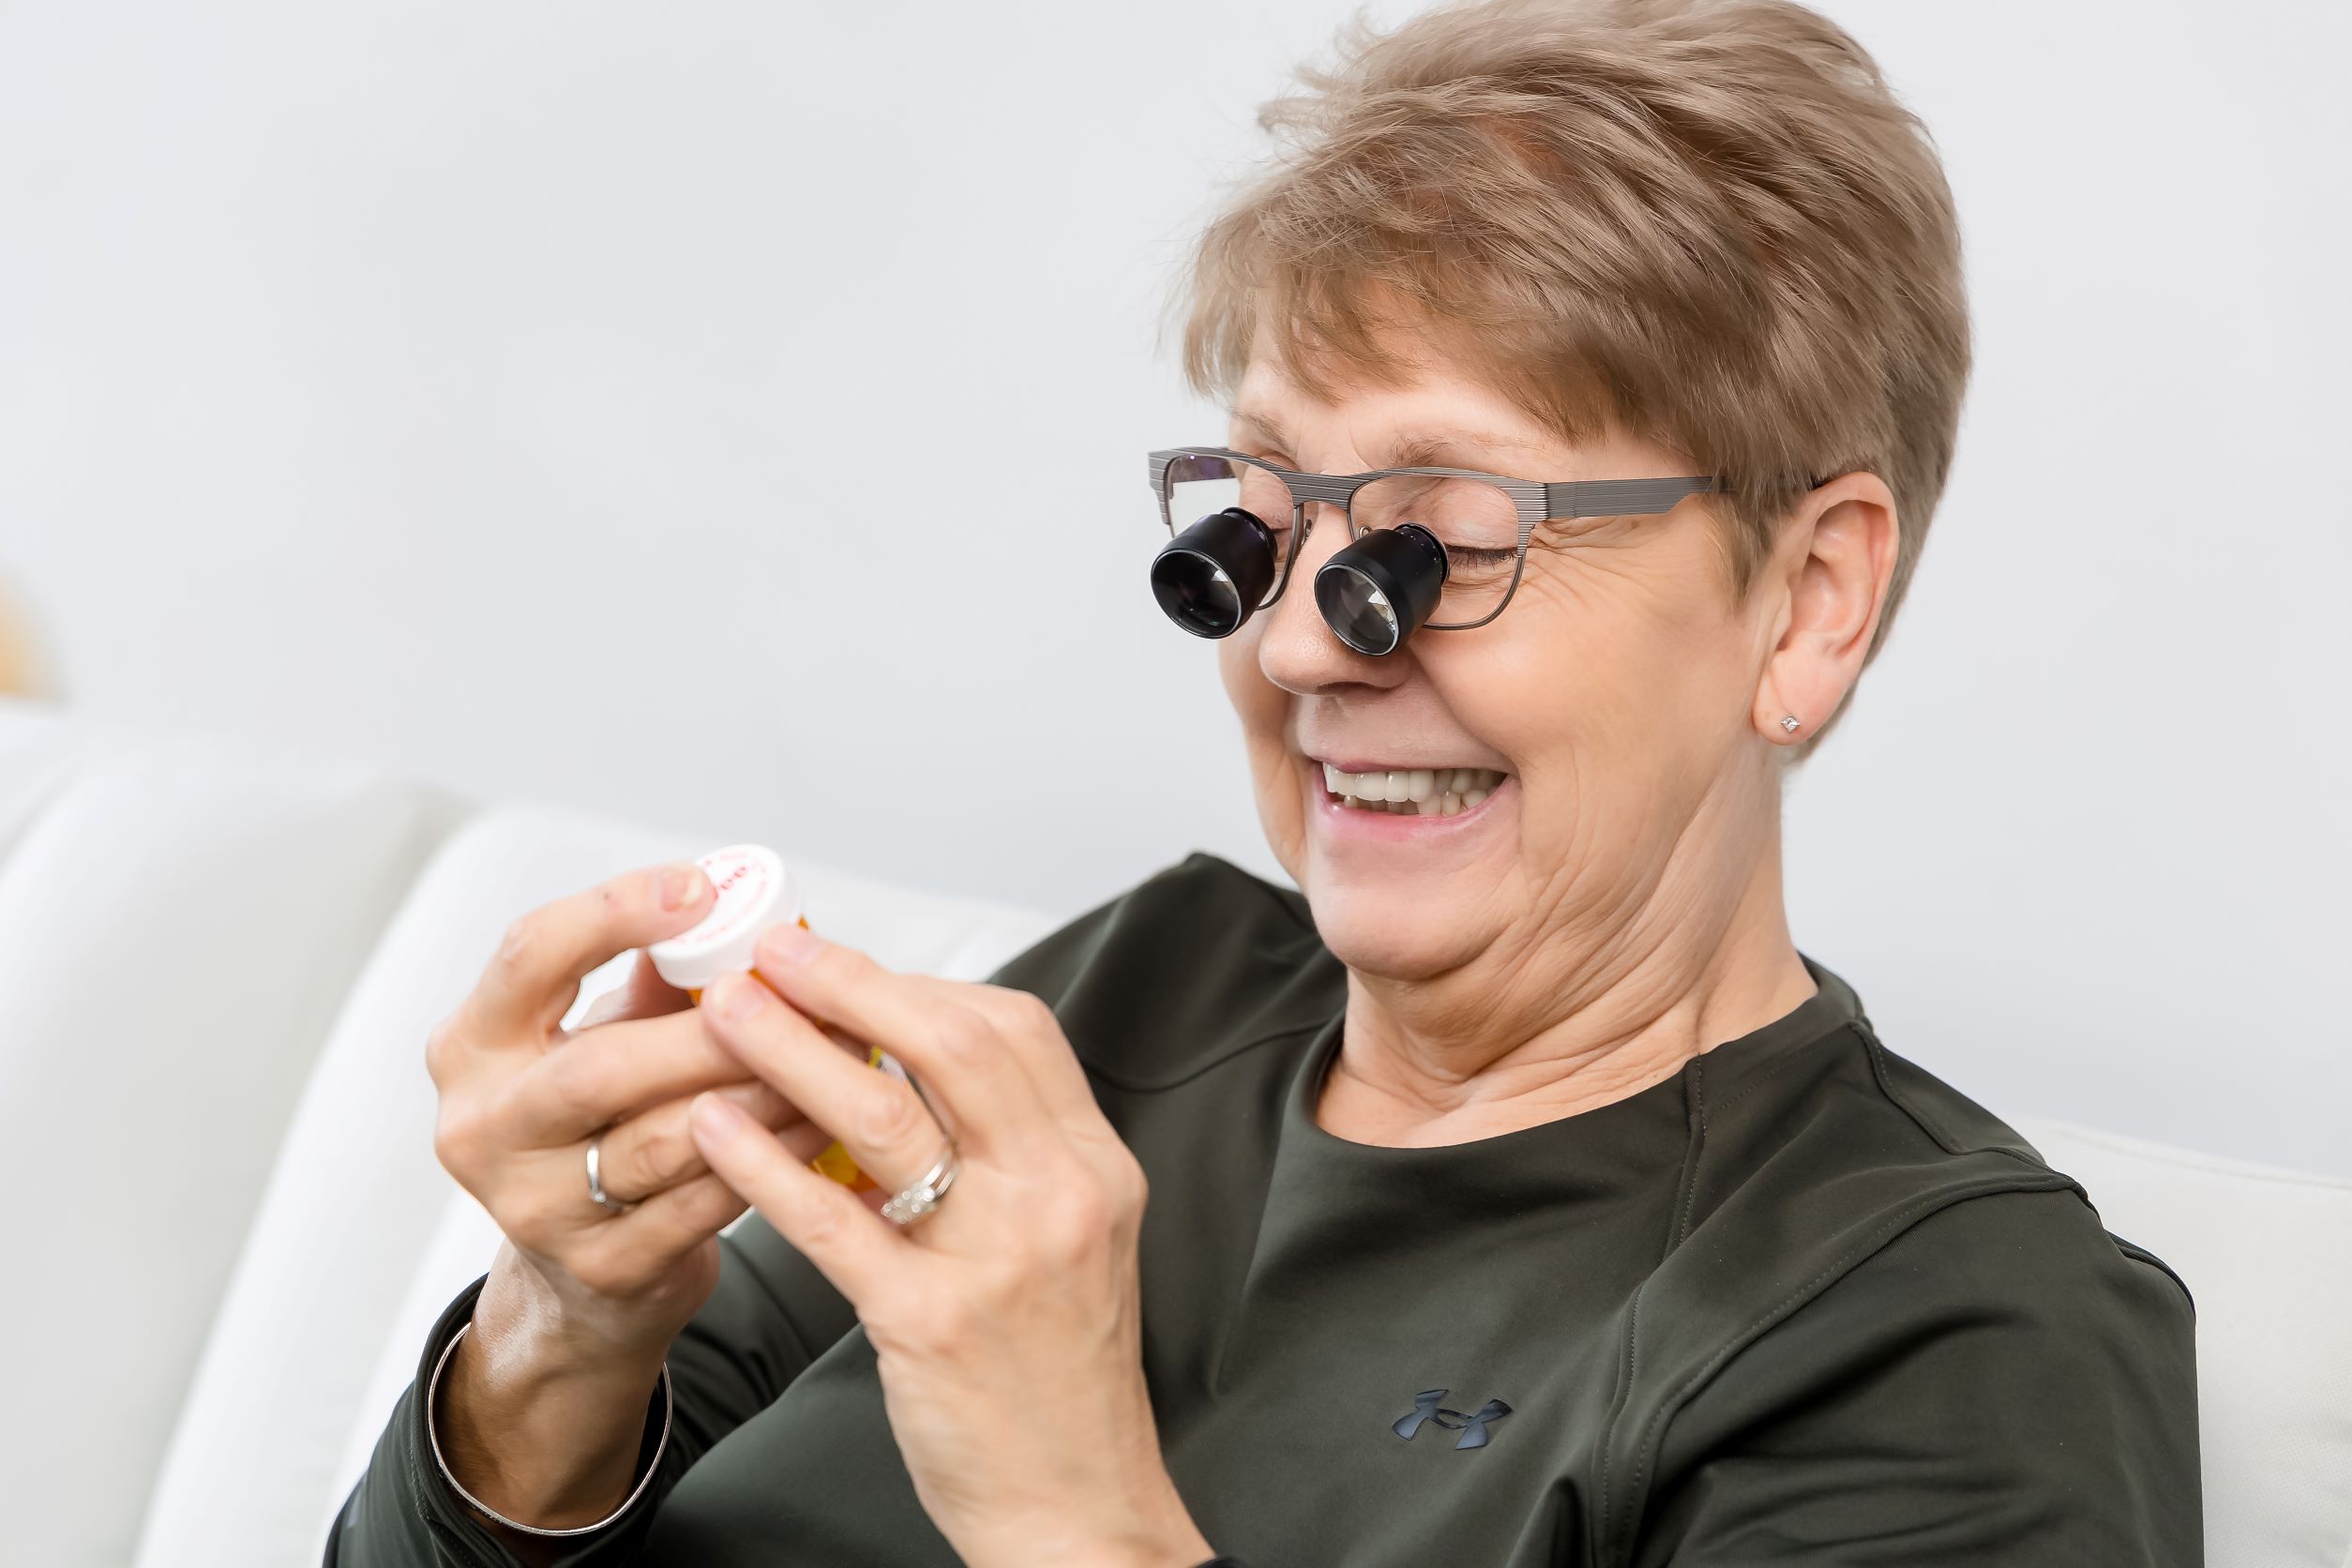 A woman wearing low vision glasses smiling looking at a prescription bottle